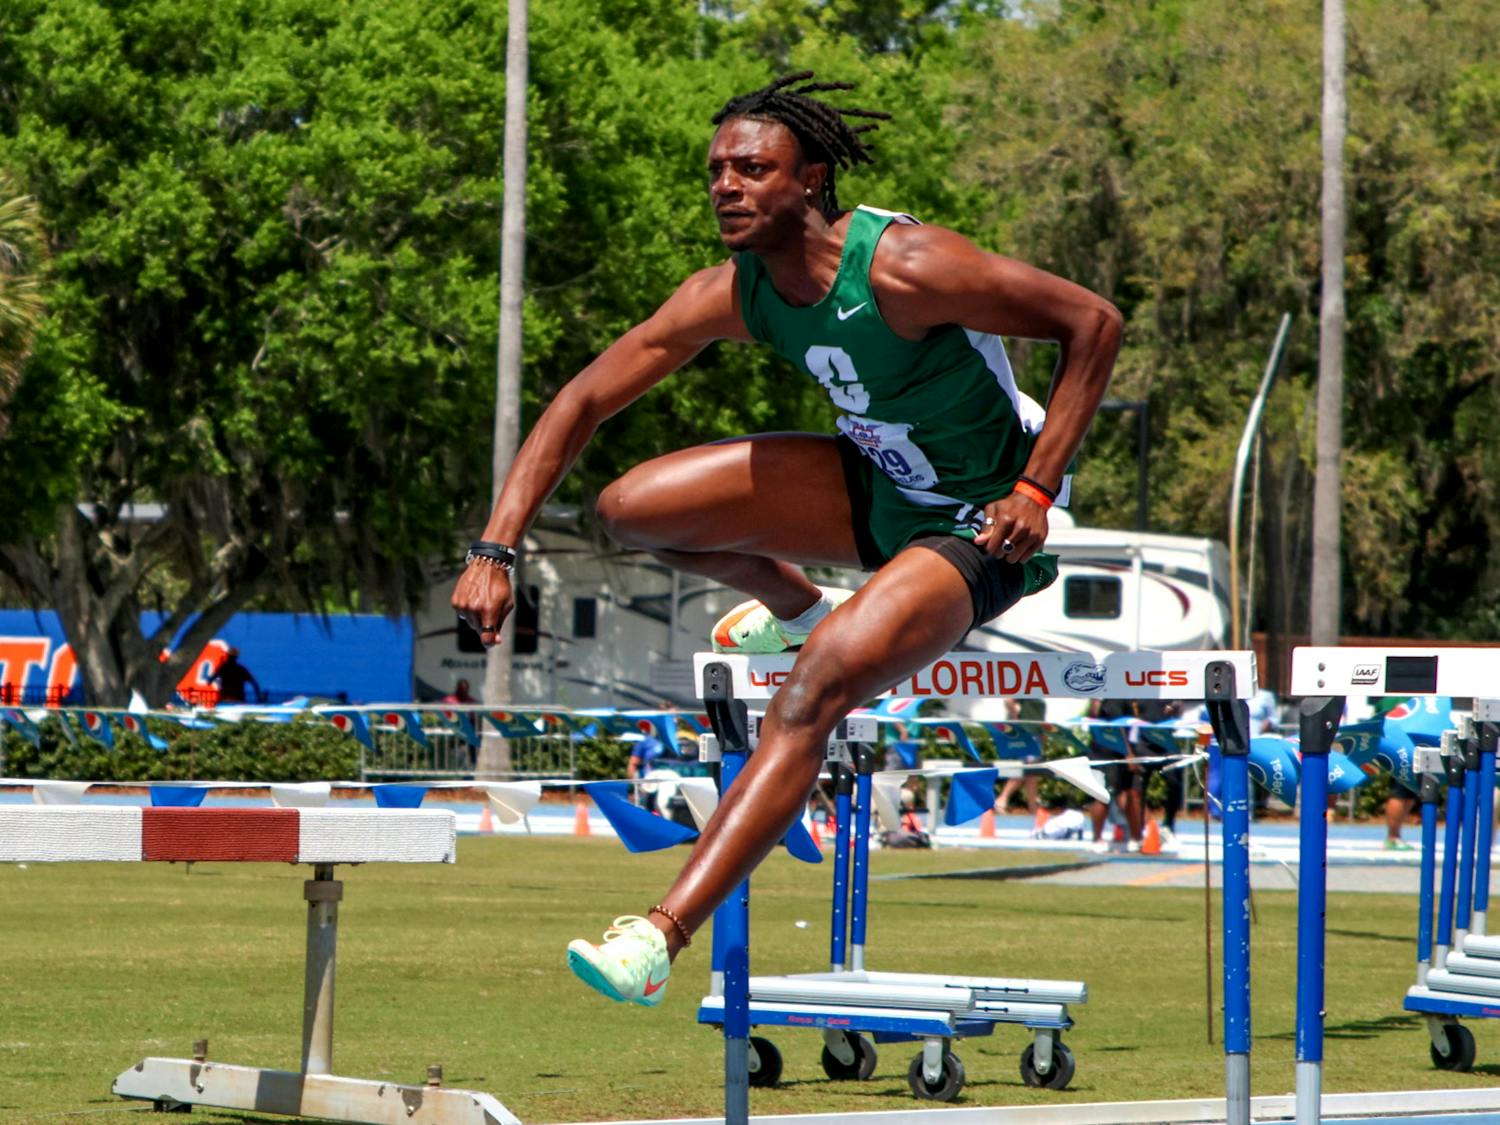 UNC Charlotte track and field athlete Sam Thompson clears a hurdle wearing a green uniform similar to his high school attire during the Pepsi Florida Relays Friday, March 31, 2023. Thompson was a student at UF before he transferred and joined UNC Charlotte&#x27;s team.